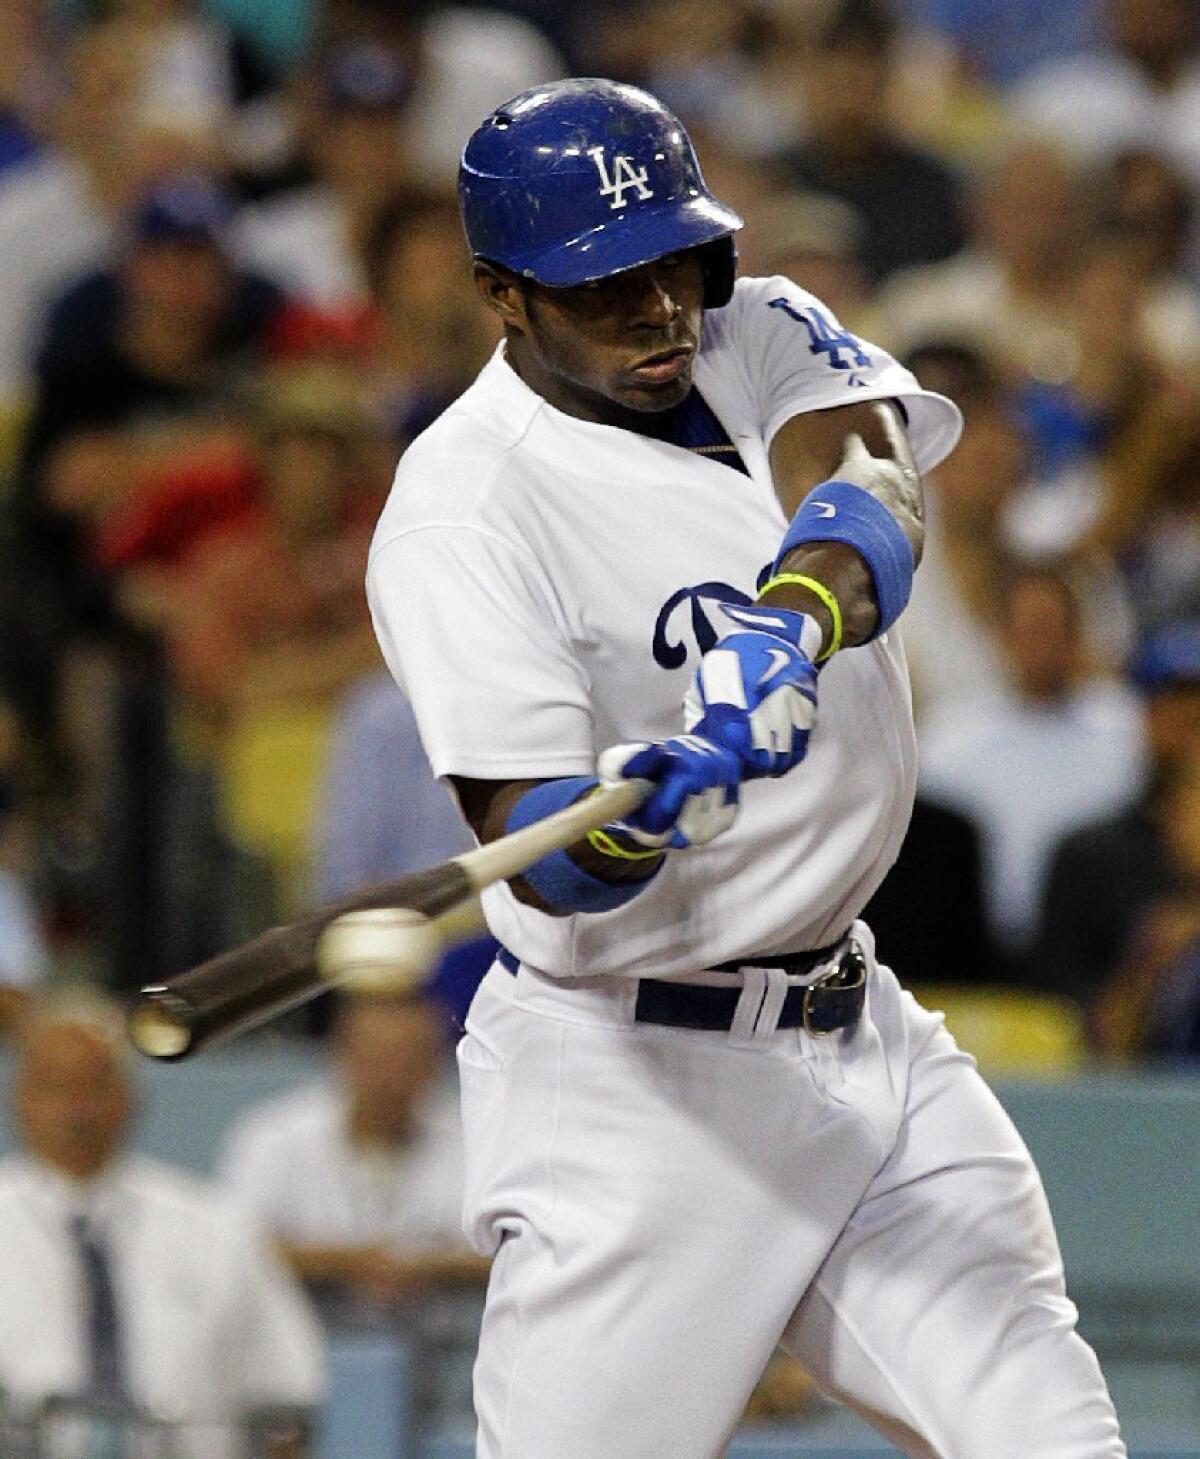 Dodgers outfielder Yasiel Puig connects. Major League Baseball has funded a study on how to make bats that break less frequently.